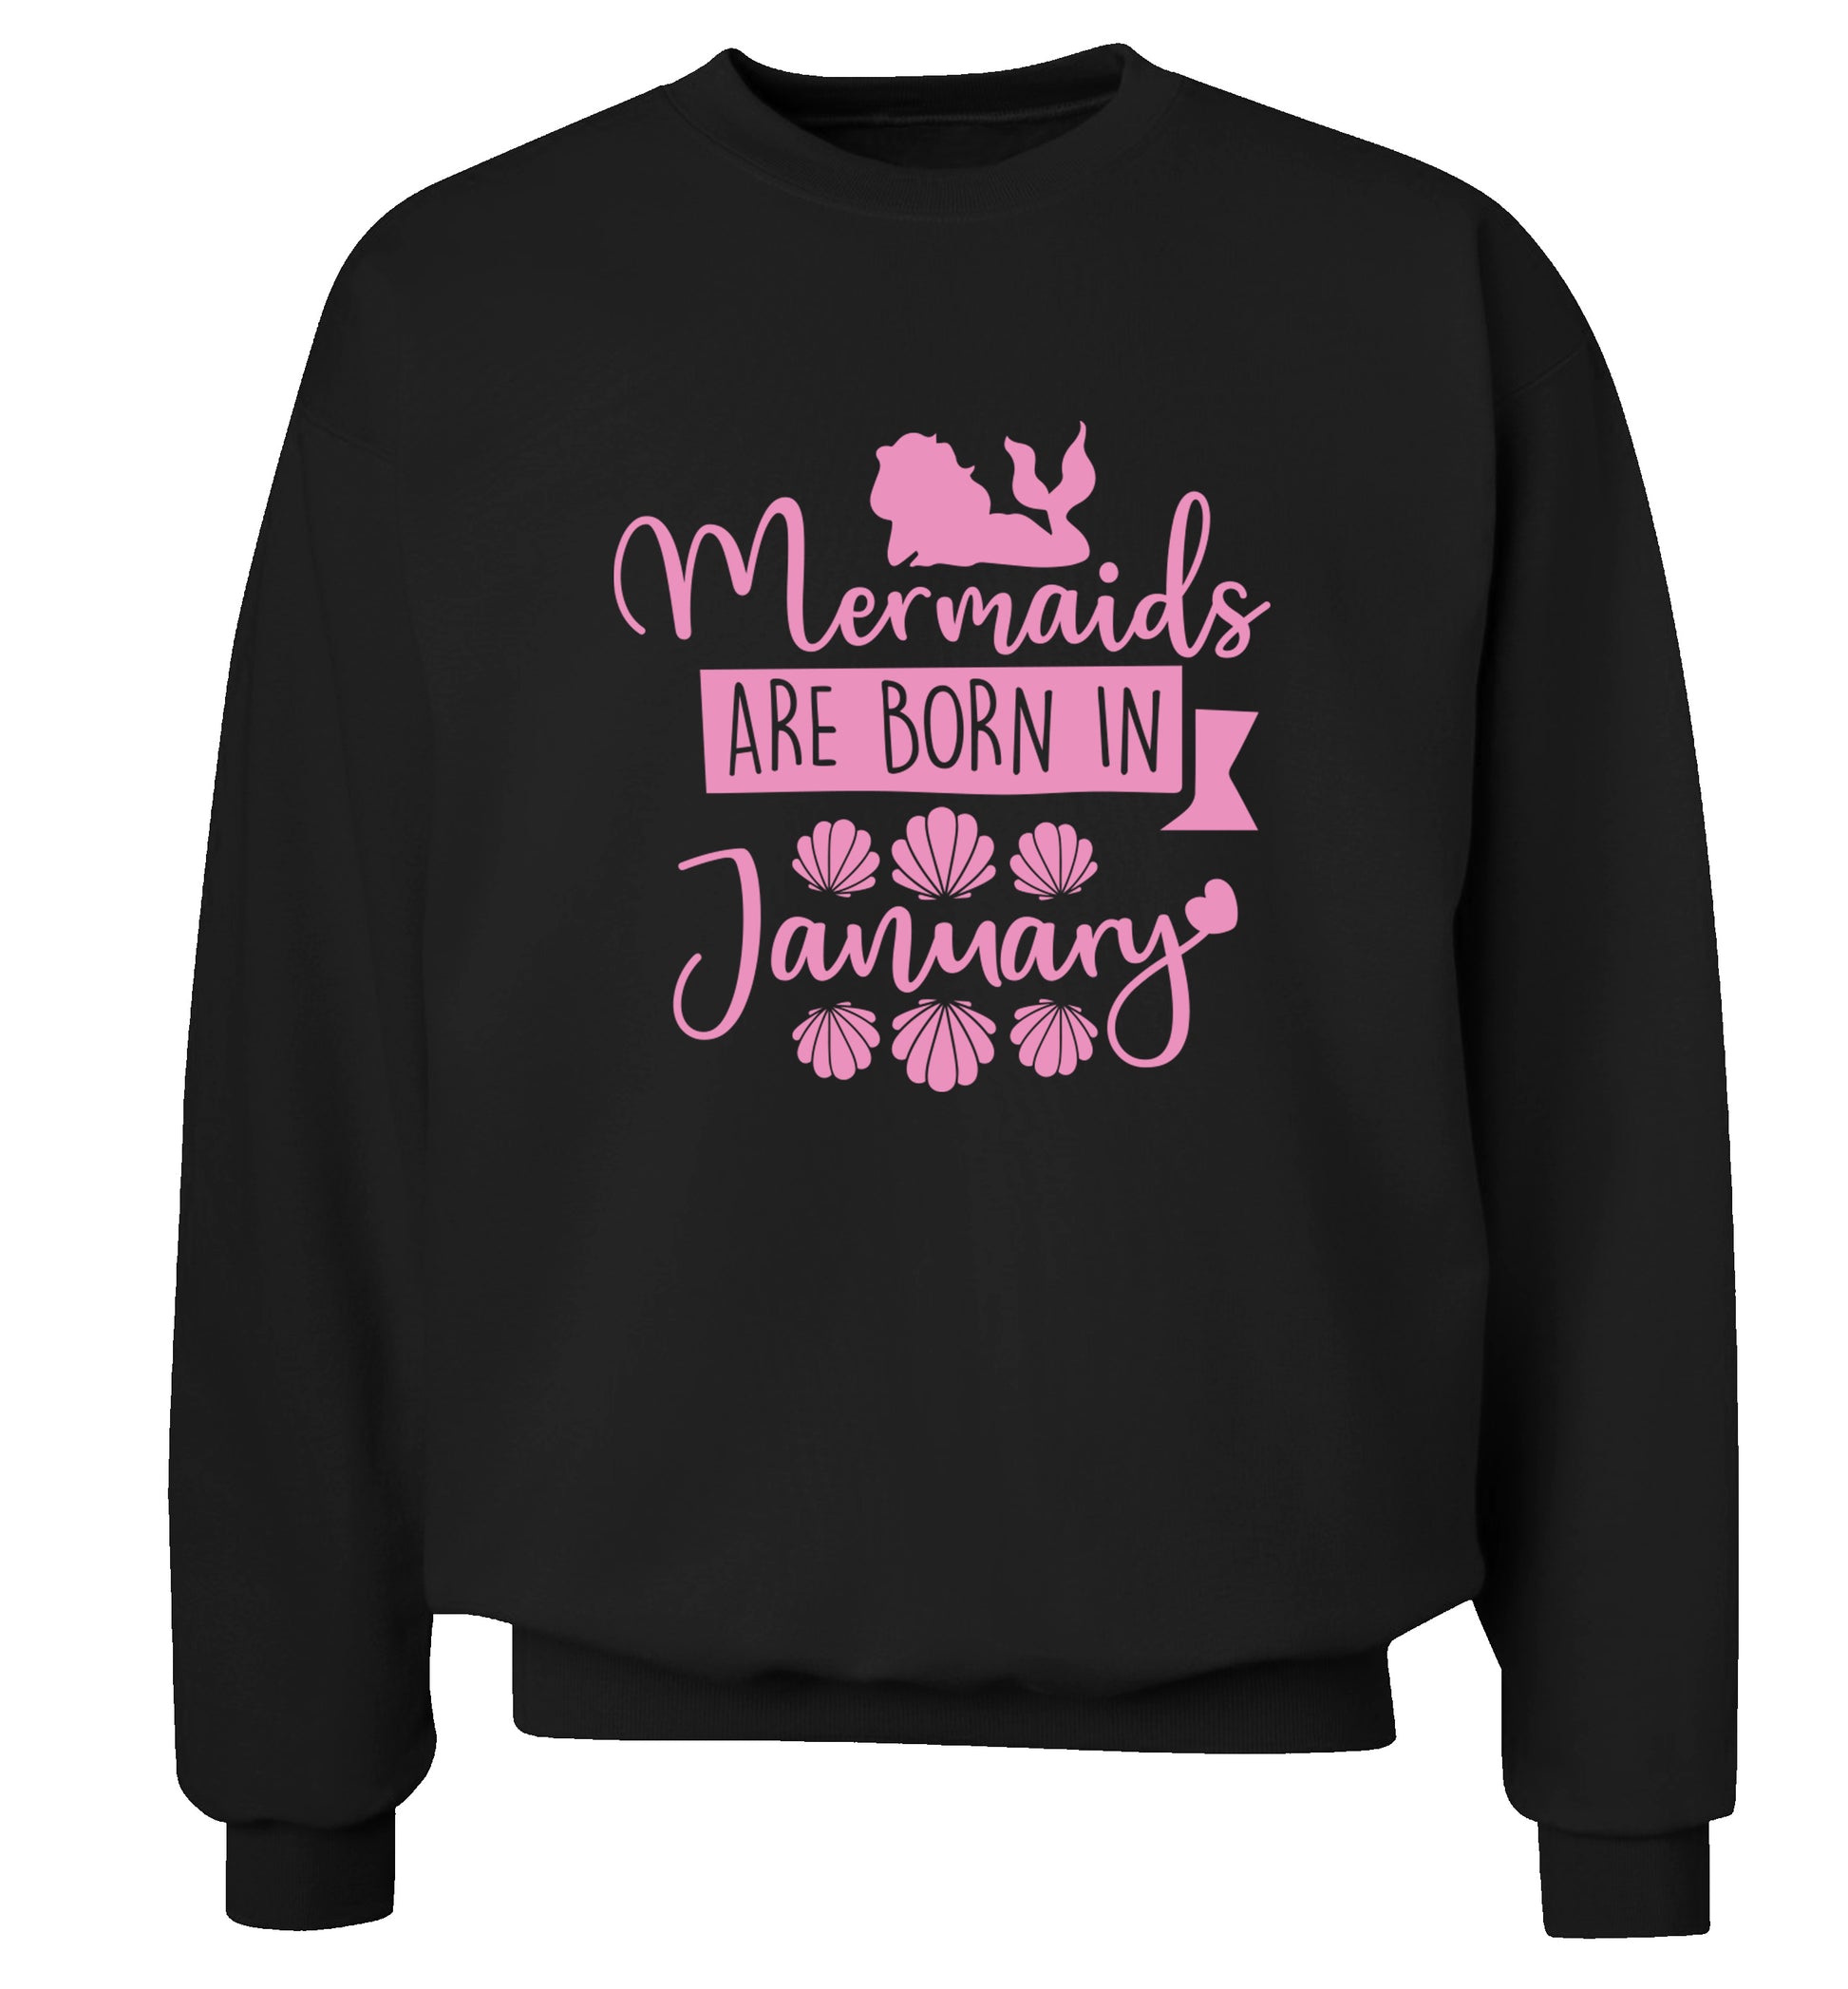 Mermaids are born in January Adult's unisex black Sweater 2XL